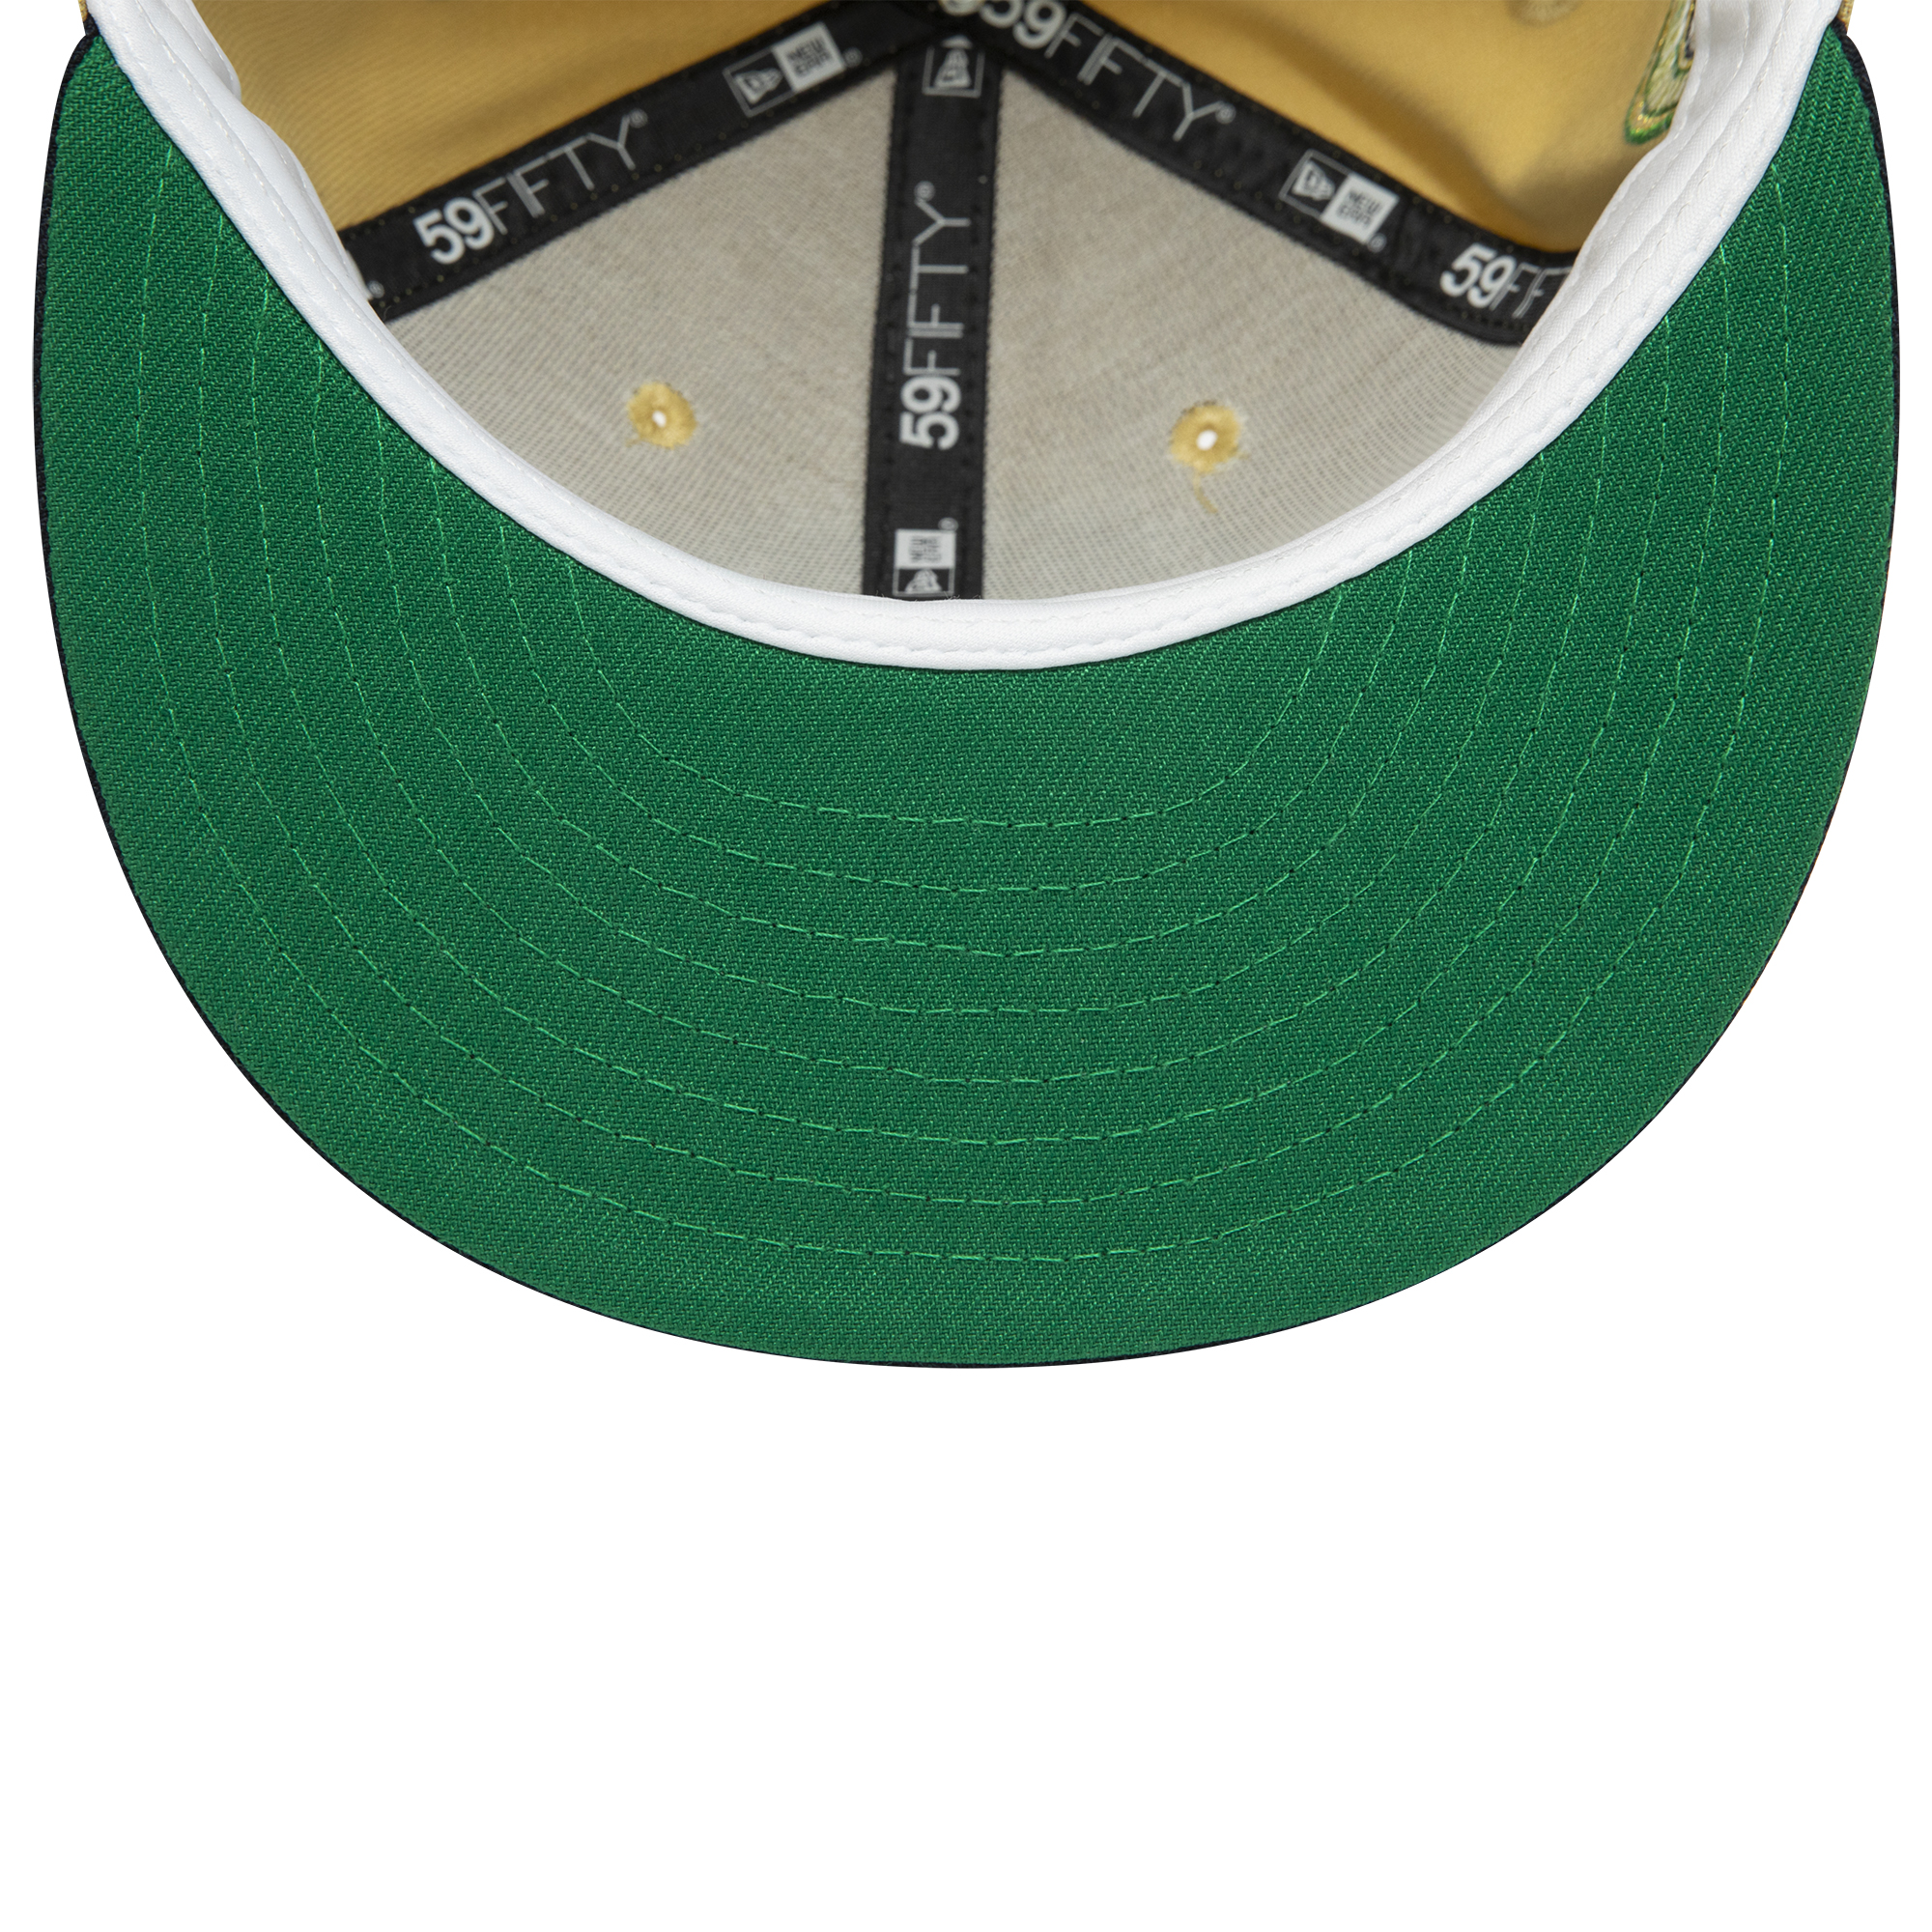 LOS ANGELES ANGELS NEW ERA 59FIFTY 50TH ANNIVERSARY HAT – Hangtime